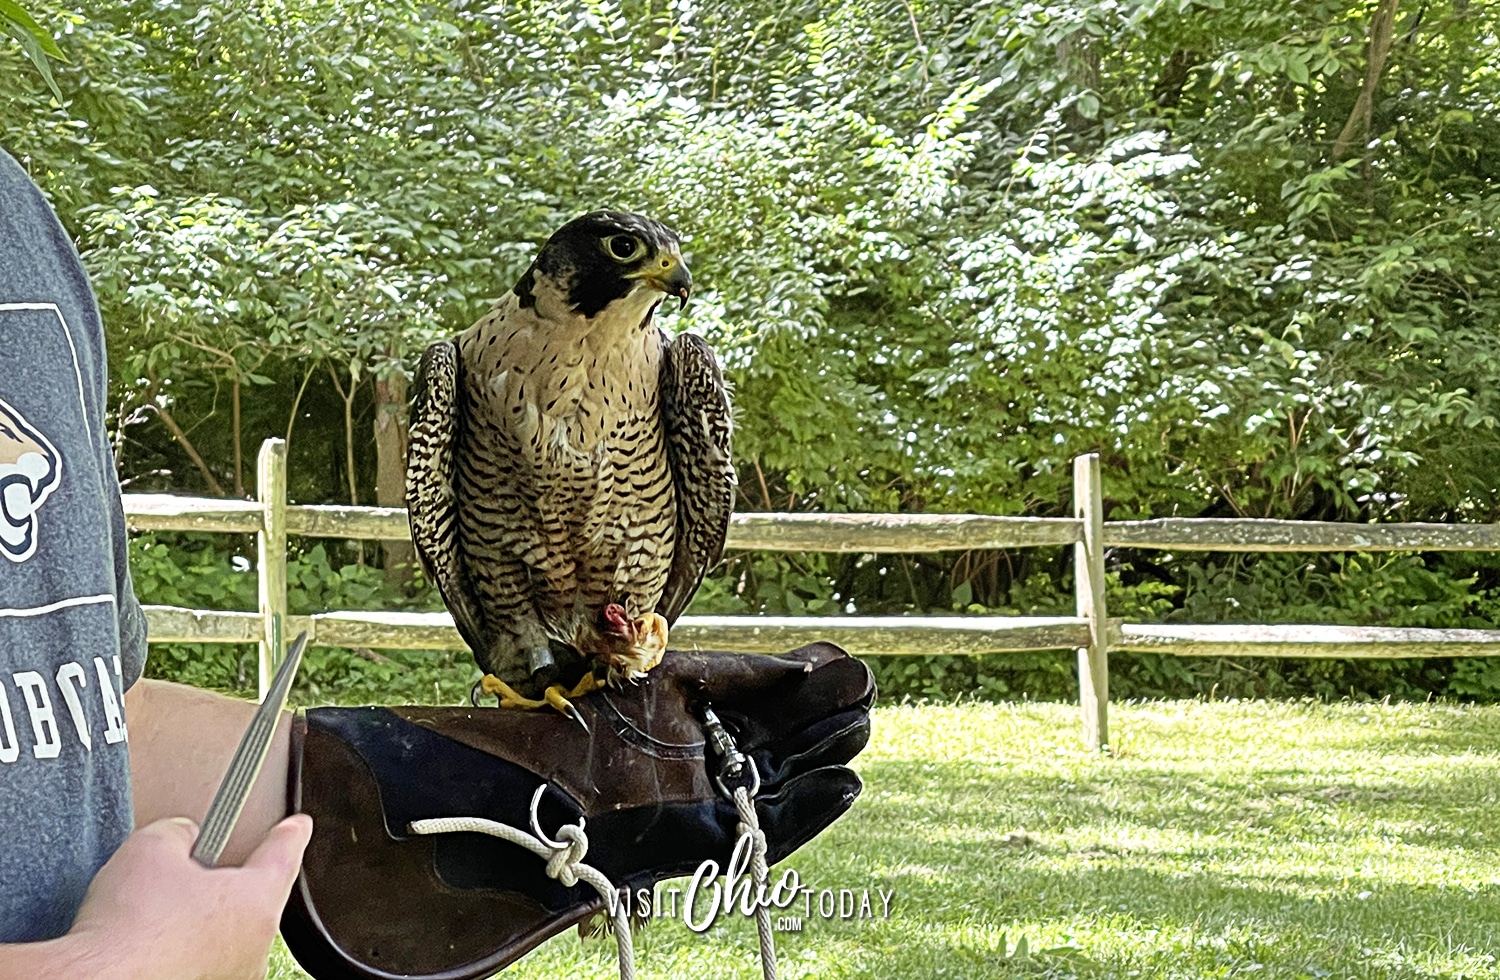 horizontal photo of a hawk on a handlers hand at Glen Helen Raptor Center. Photo credit: Cindy Gordon of VisitOhioToday.com